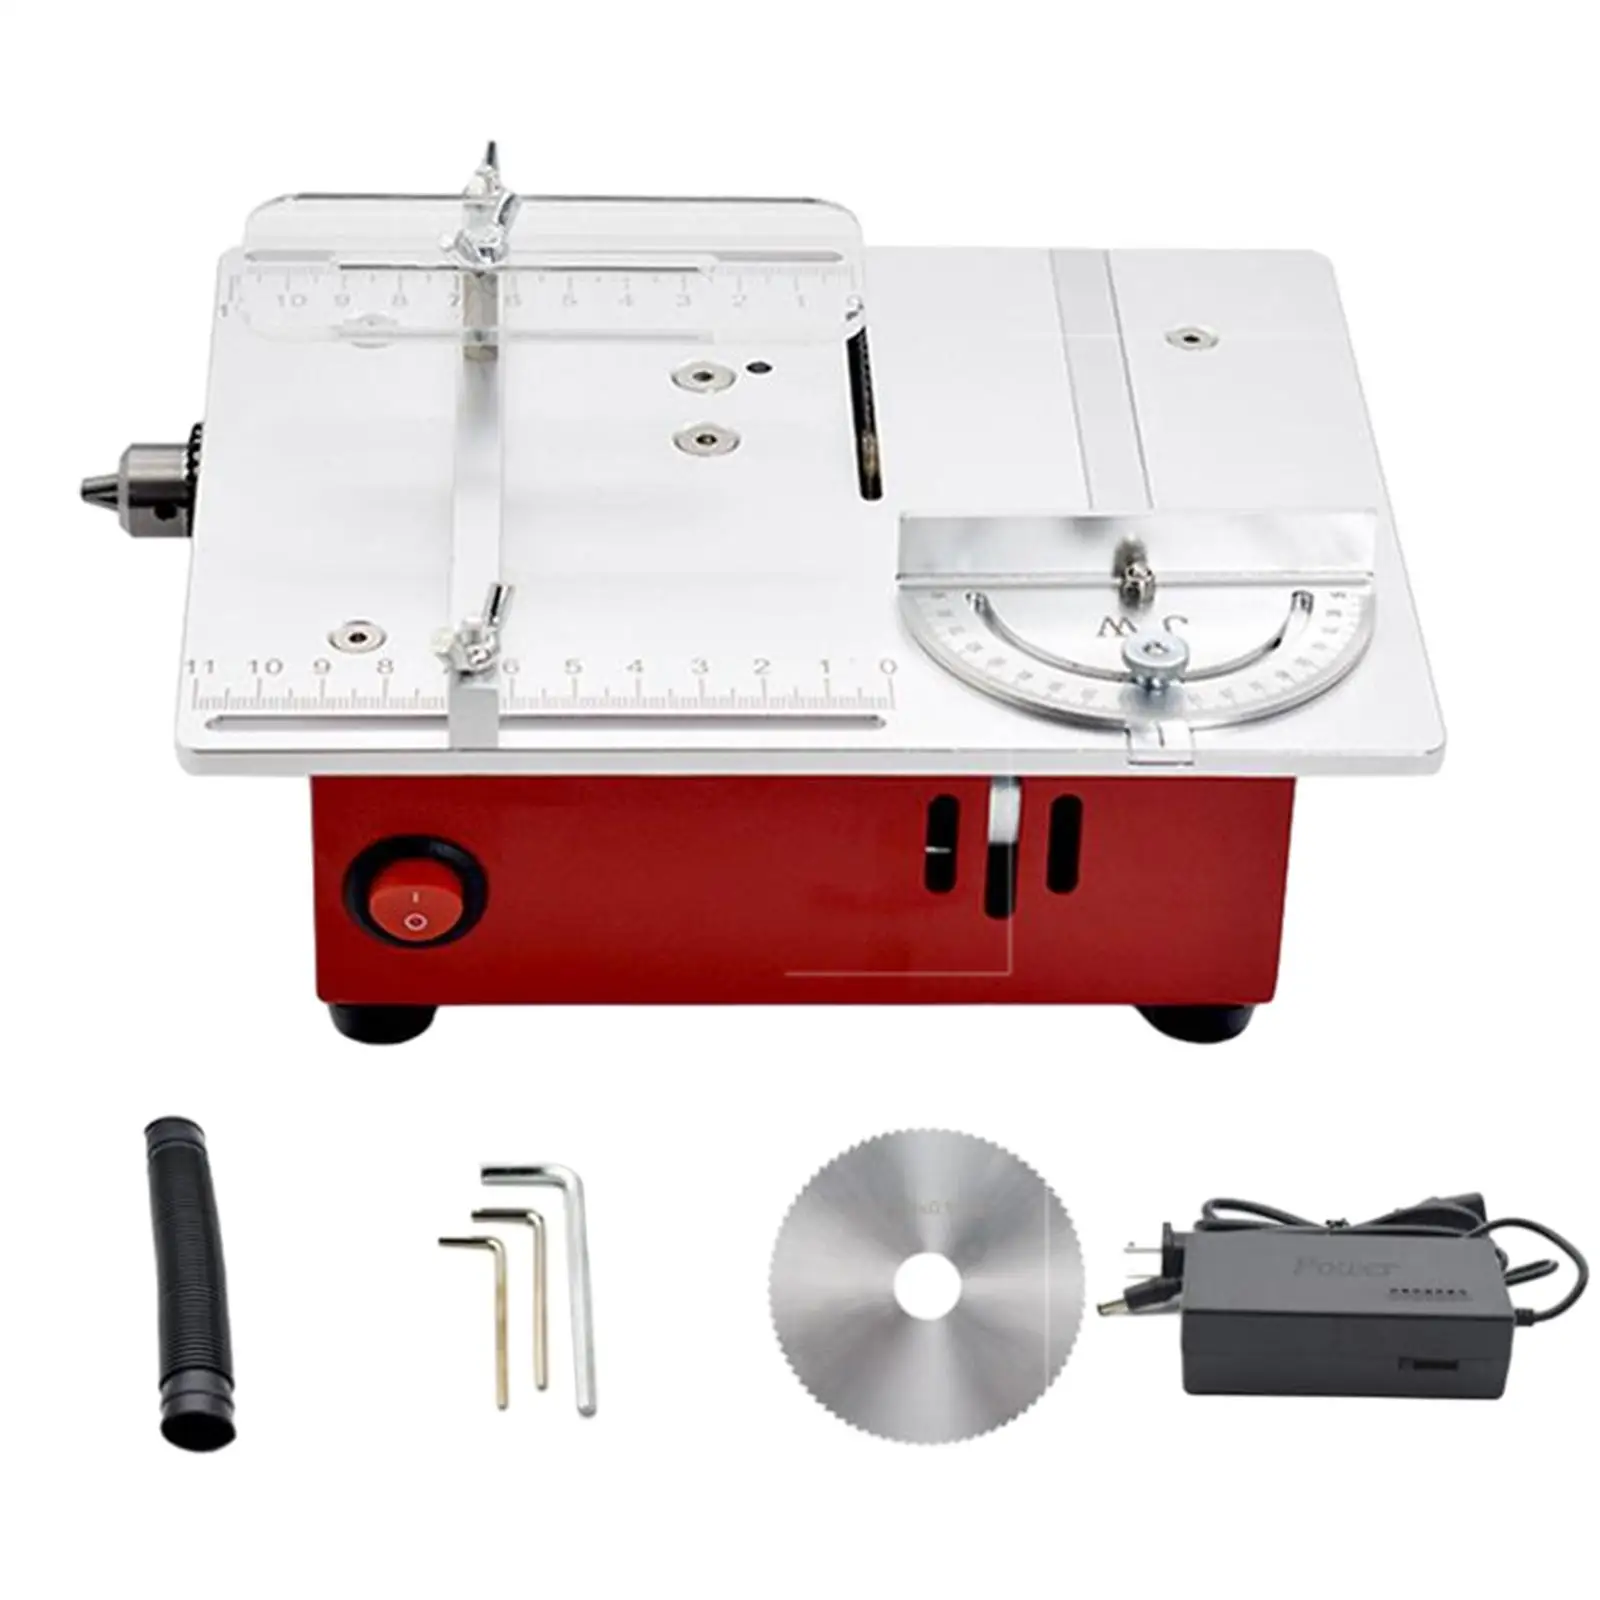 Mini Table Saw Portable Electric Cutting Machine Small Precision Hobby Table Saw for Metal Plastic Cutting Miniature Wood Crafts